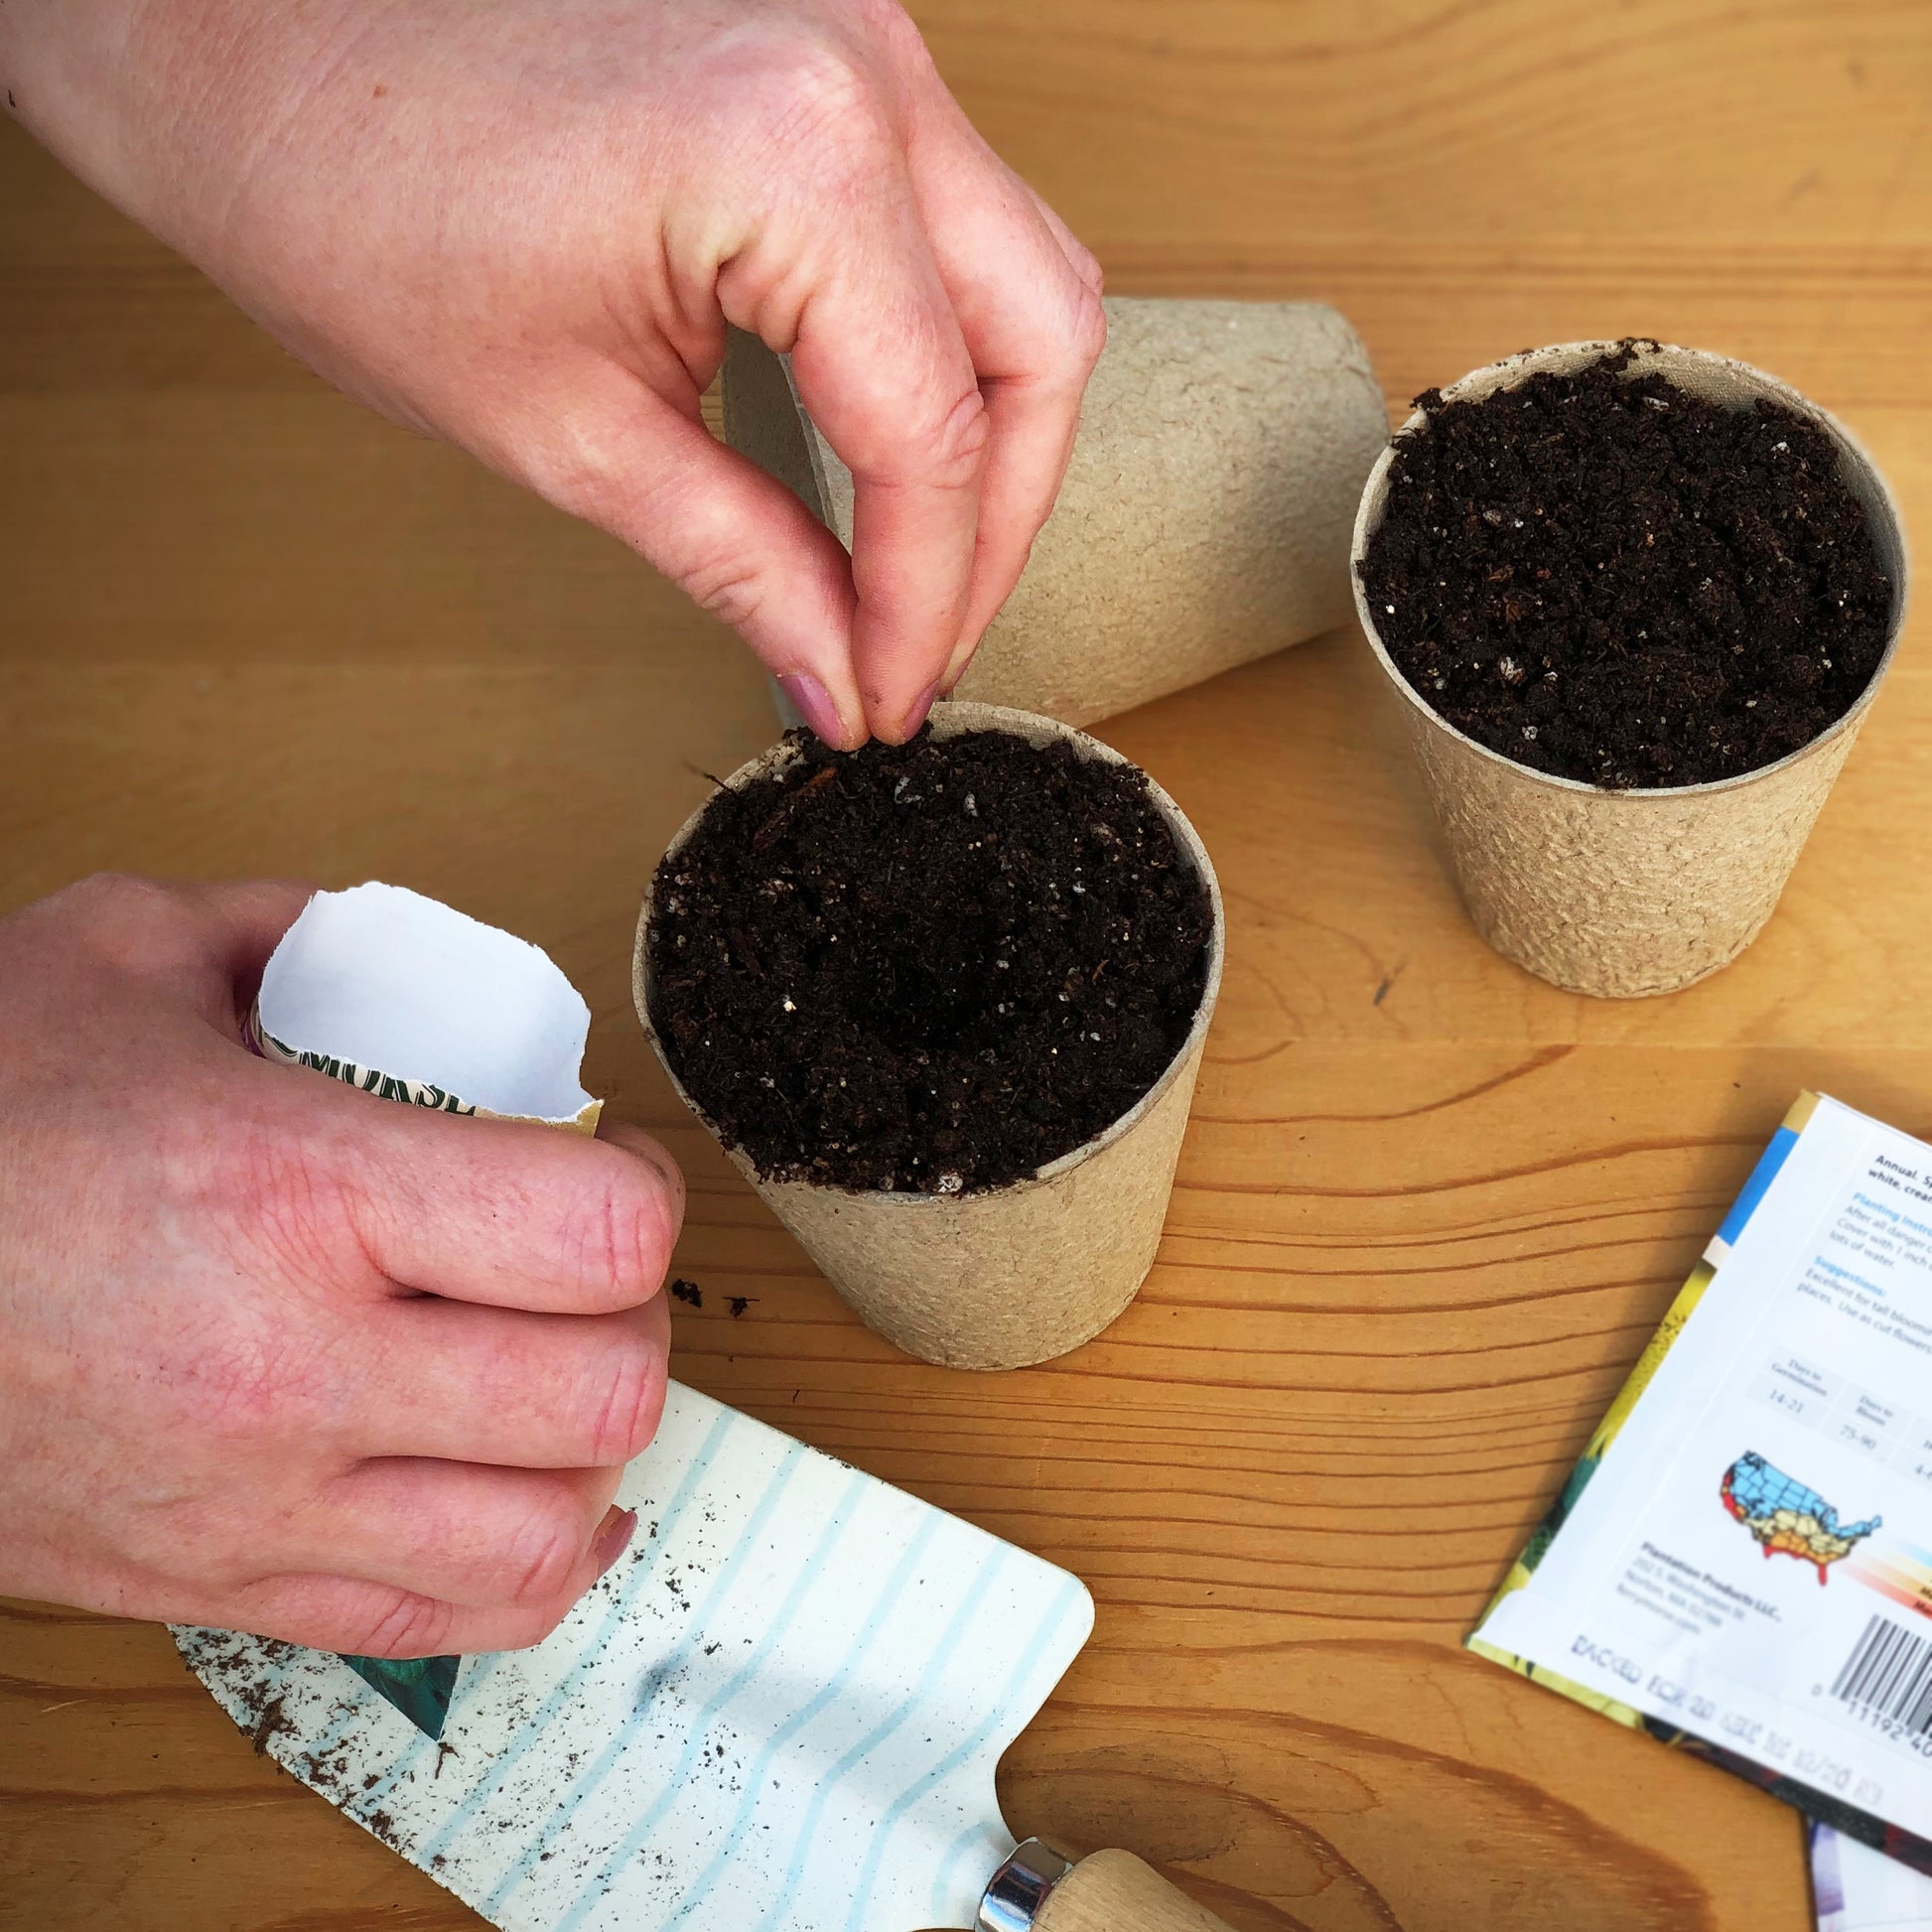 Sowing Heirloom Box Car Willie Tomato Seeds into biodegradable peat pots filled with sowing mix.